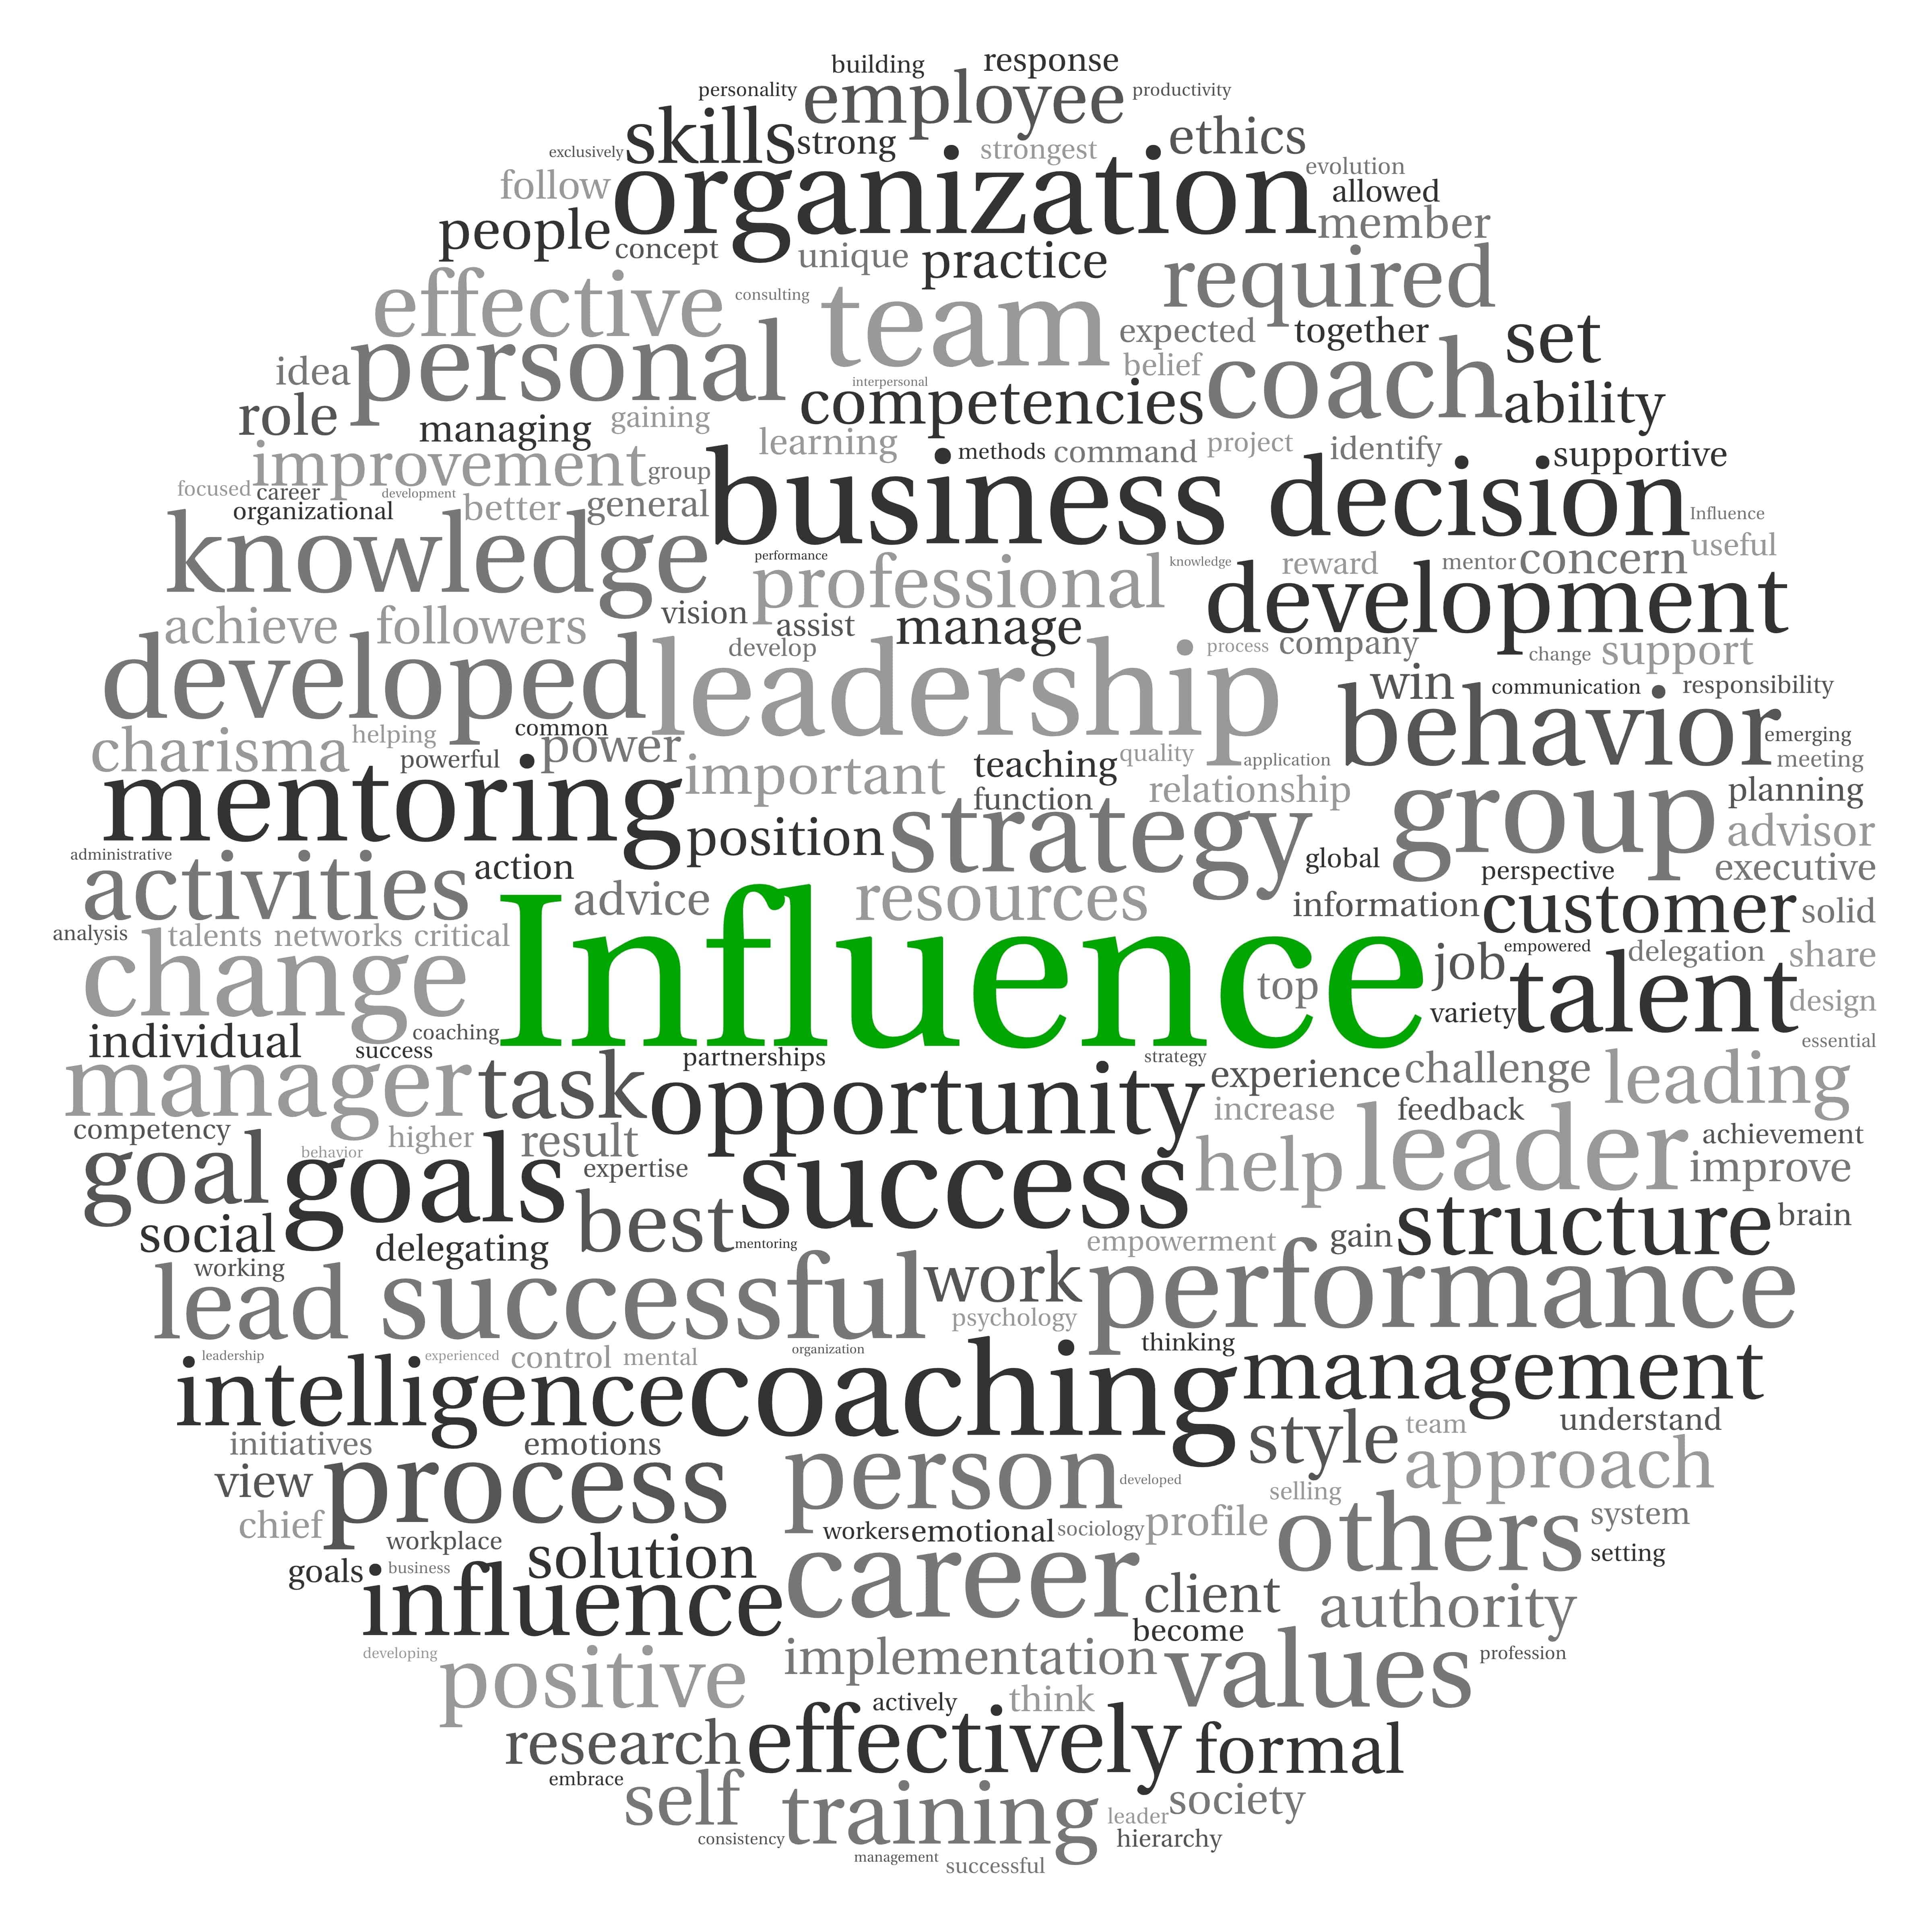 A few ways to build influence on social media